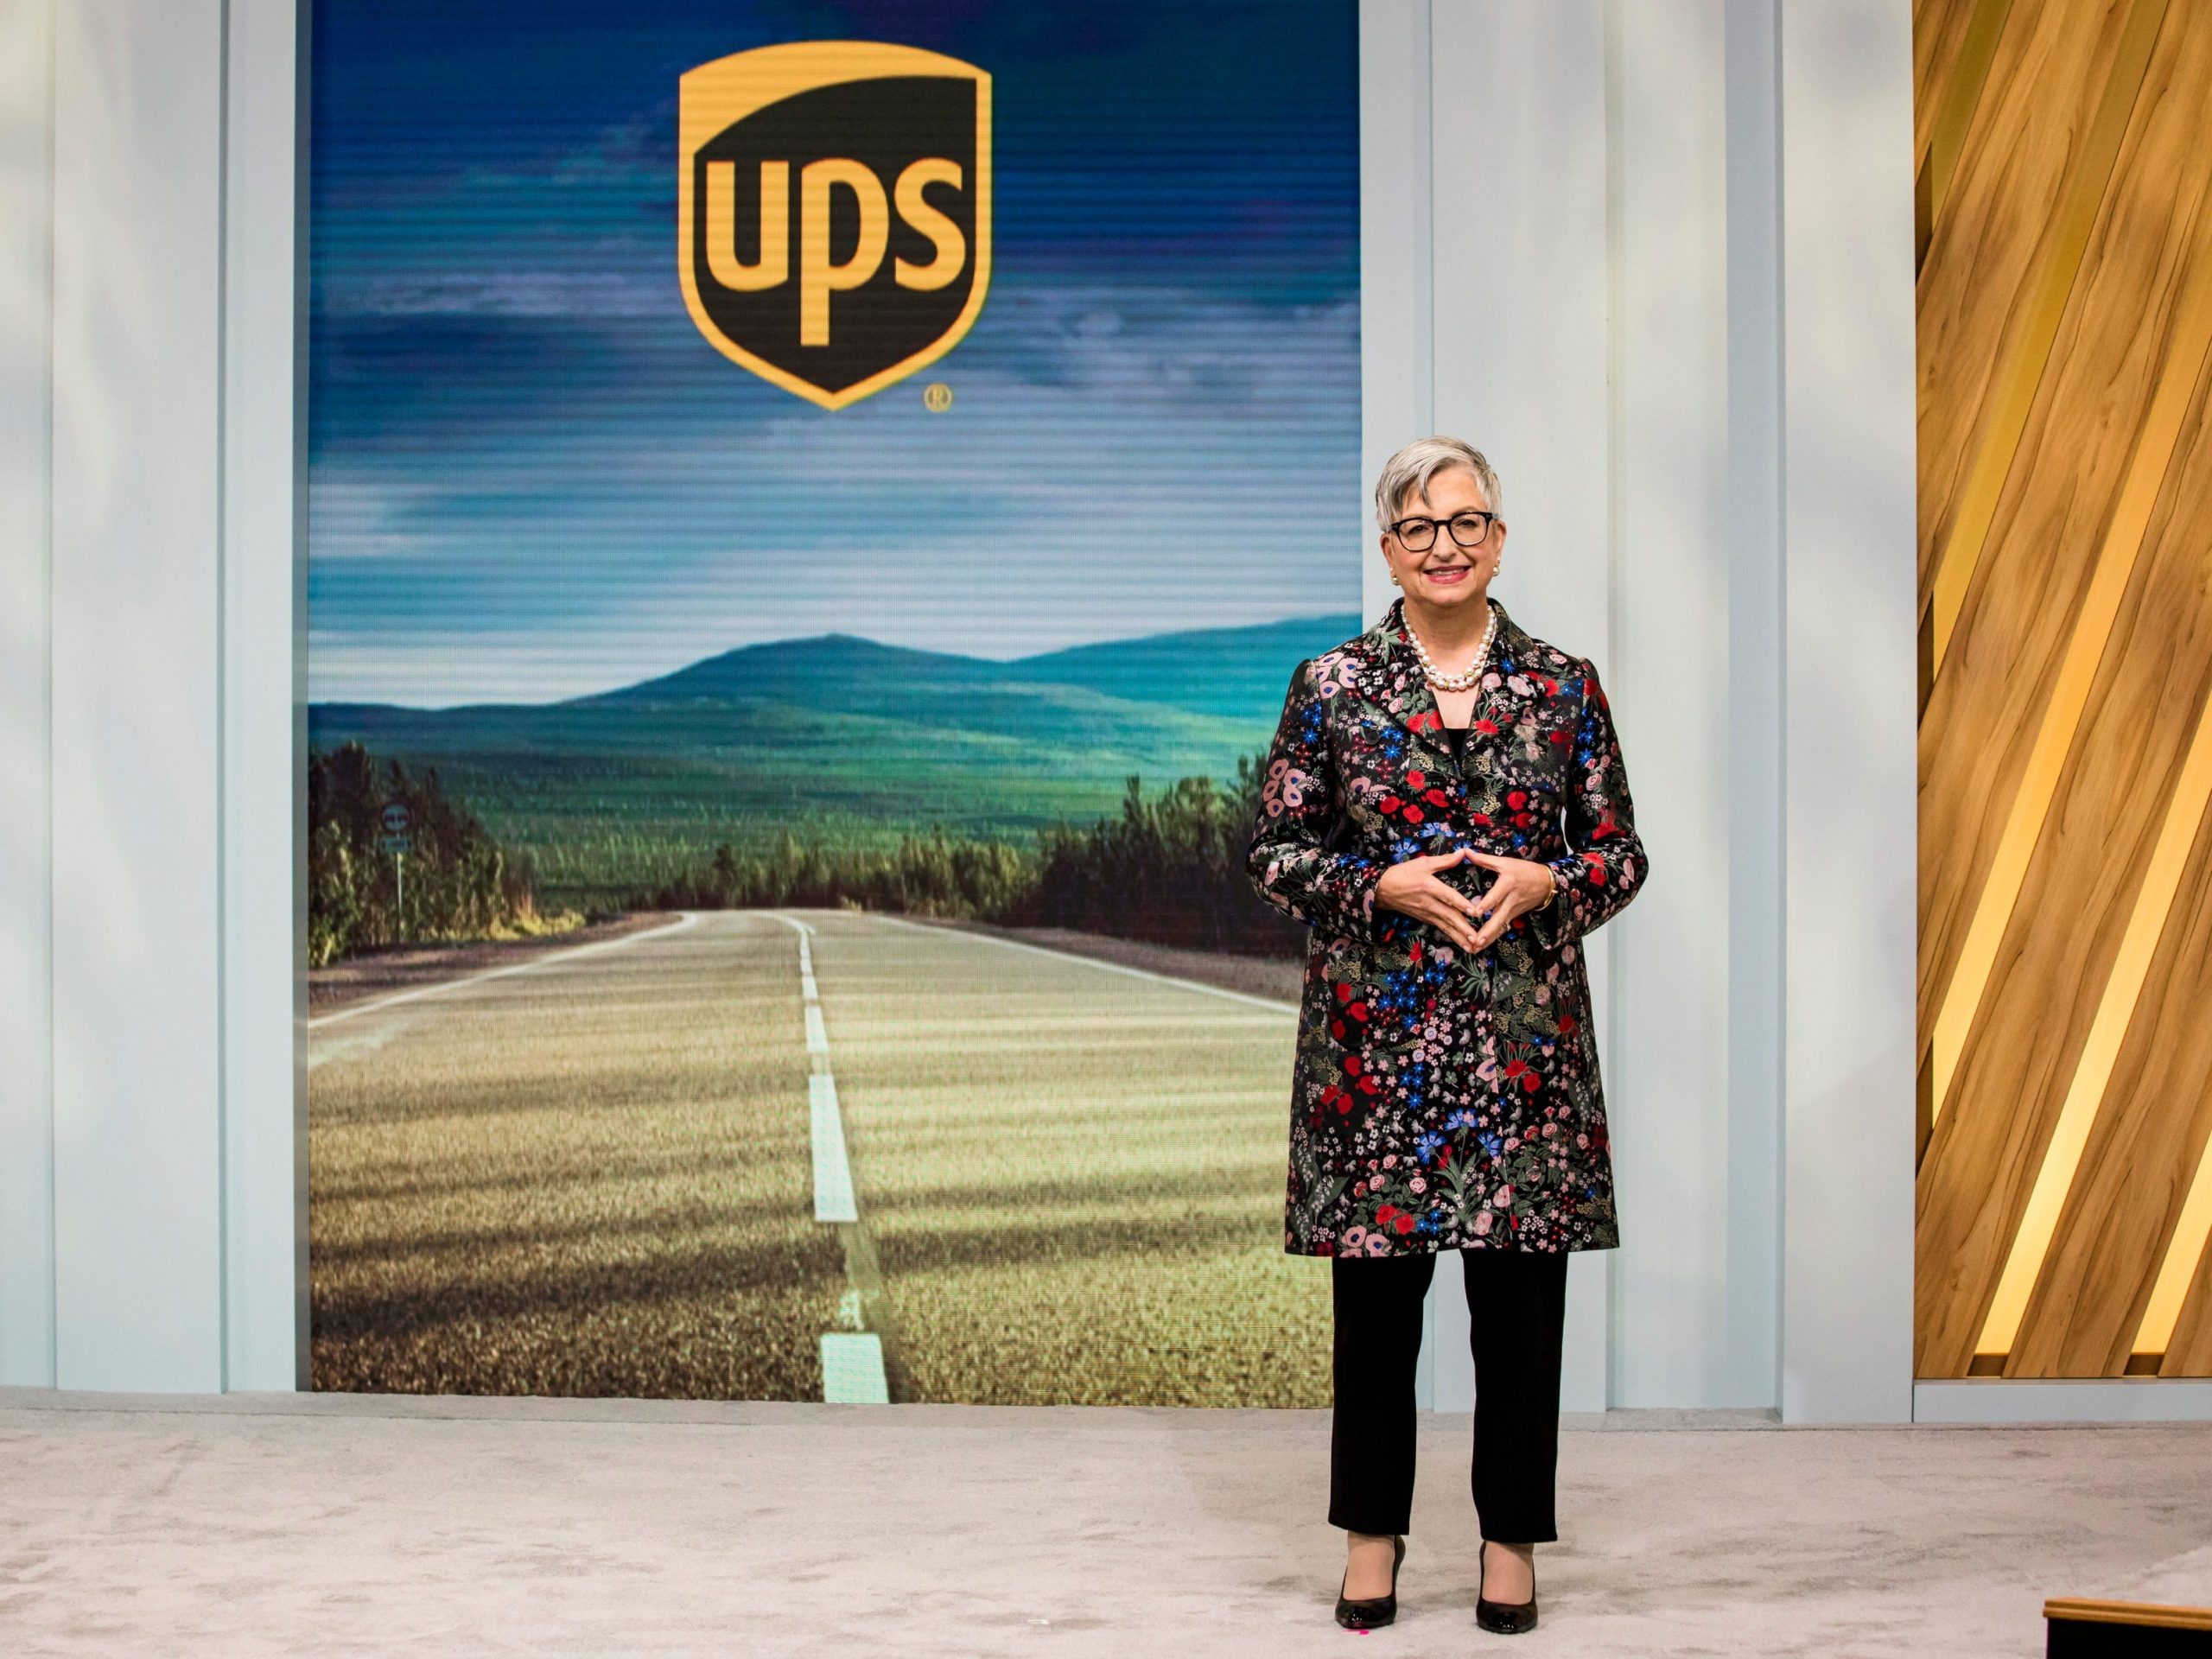 UPS CEO Carol Tomé presents on a stage before a UPS banner.